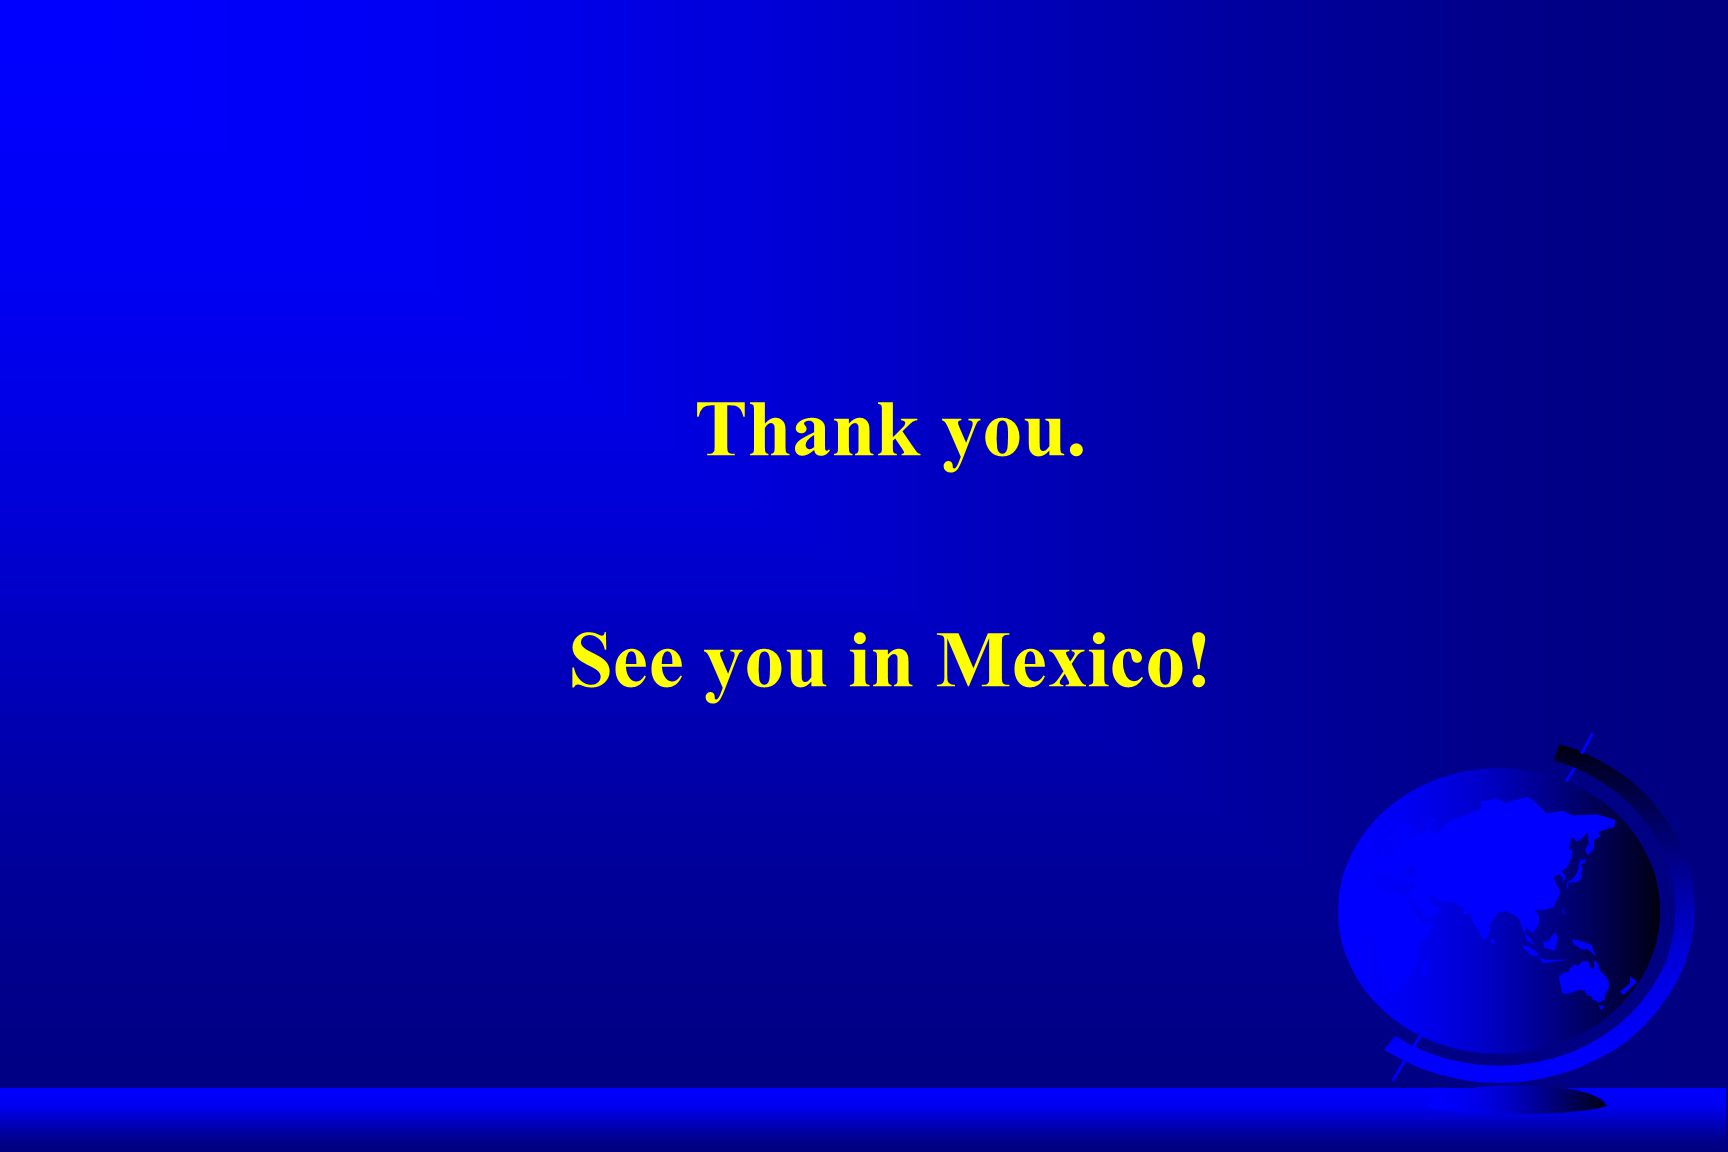 Thank you. See you in Mexico!